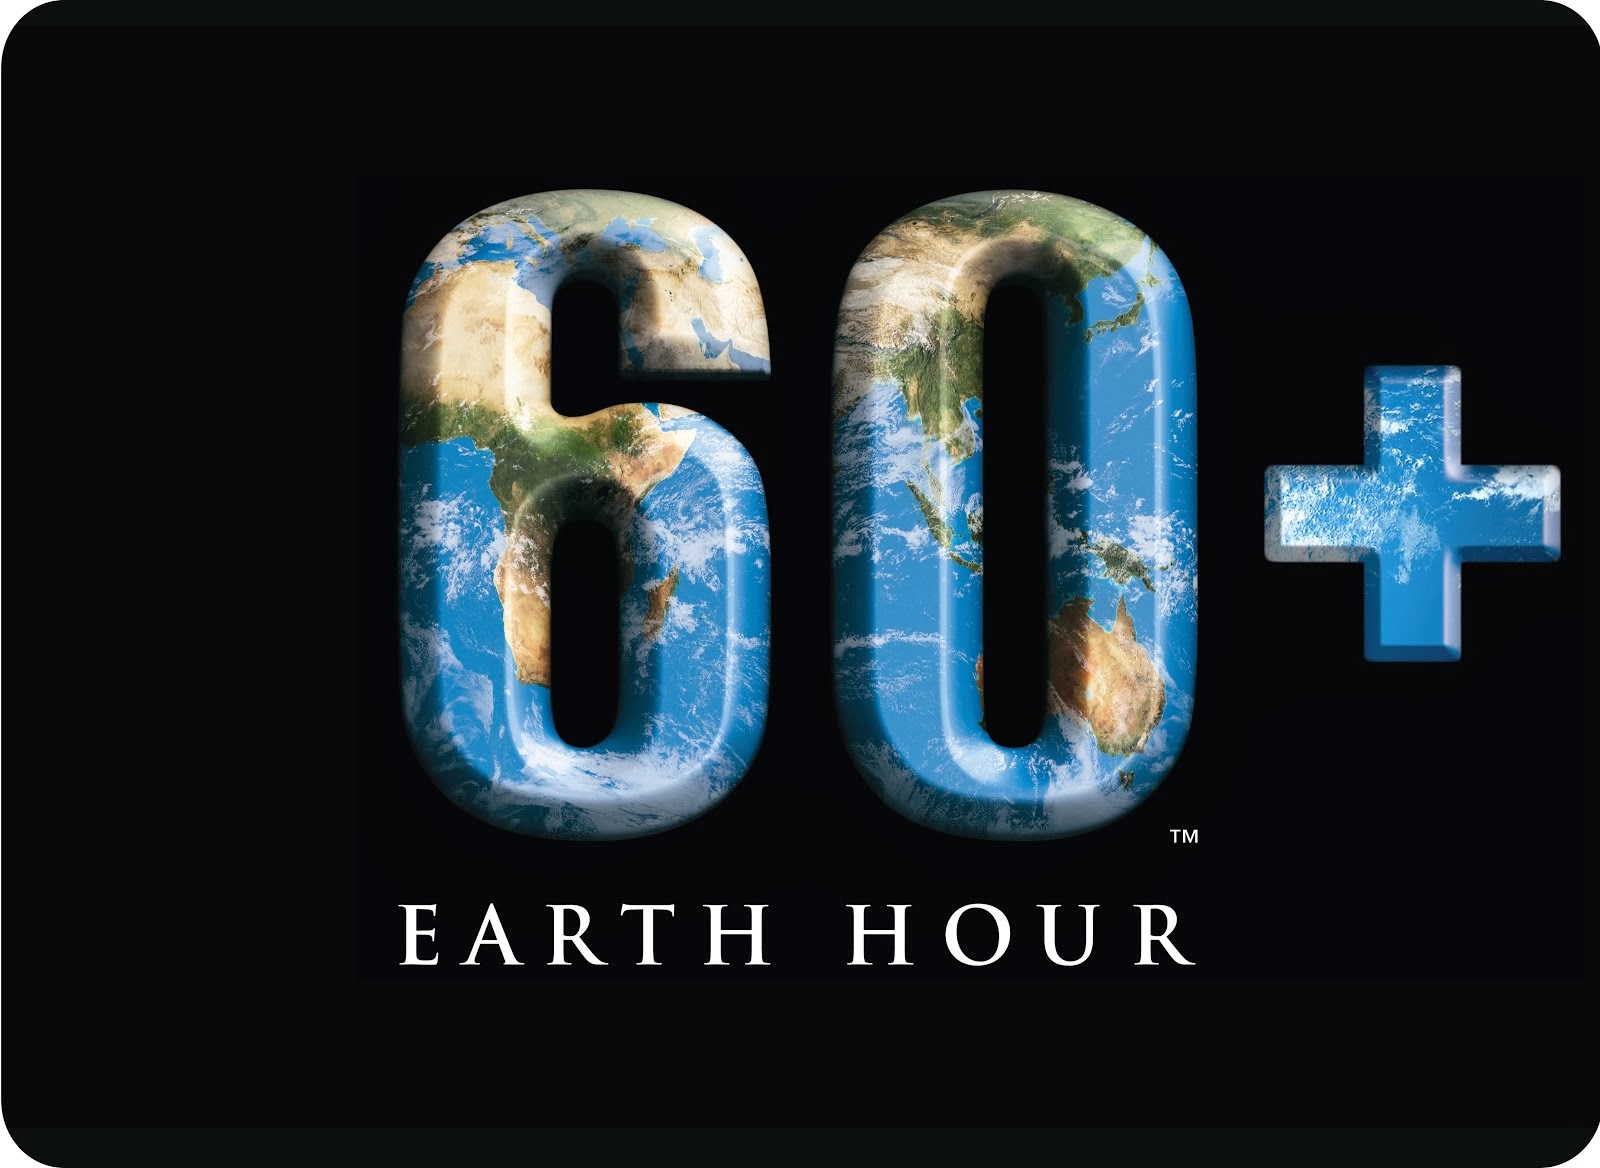 Support Earth Hour